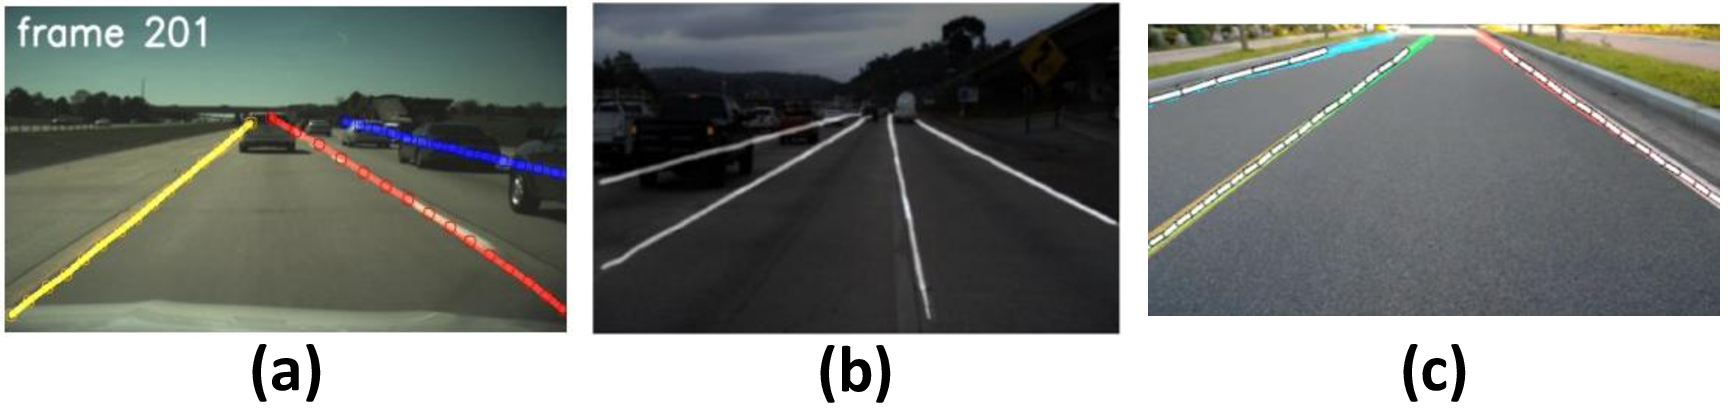 Figure 2: Example of the (a) Object Detection [14], (b) Semantic Segmentation [17] and (c) Instance Segmentation [18] approaches for the lane detection problem.